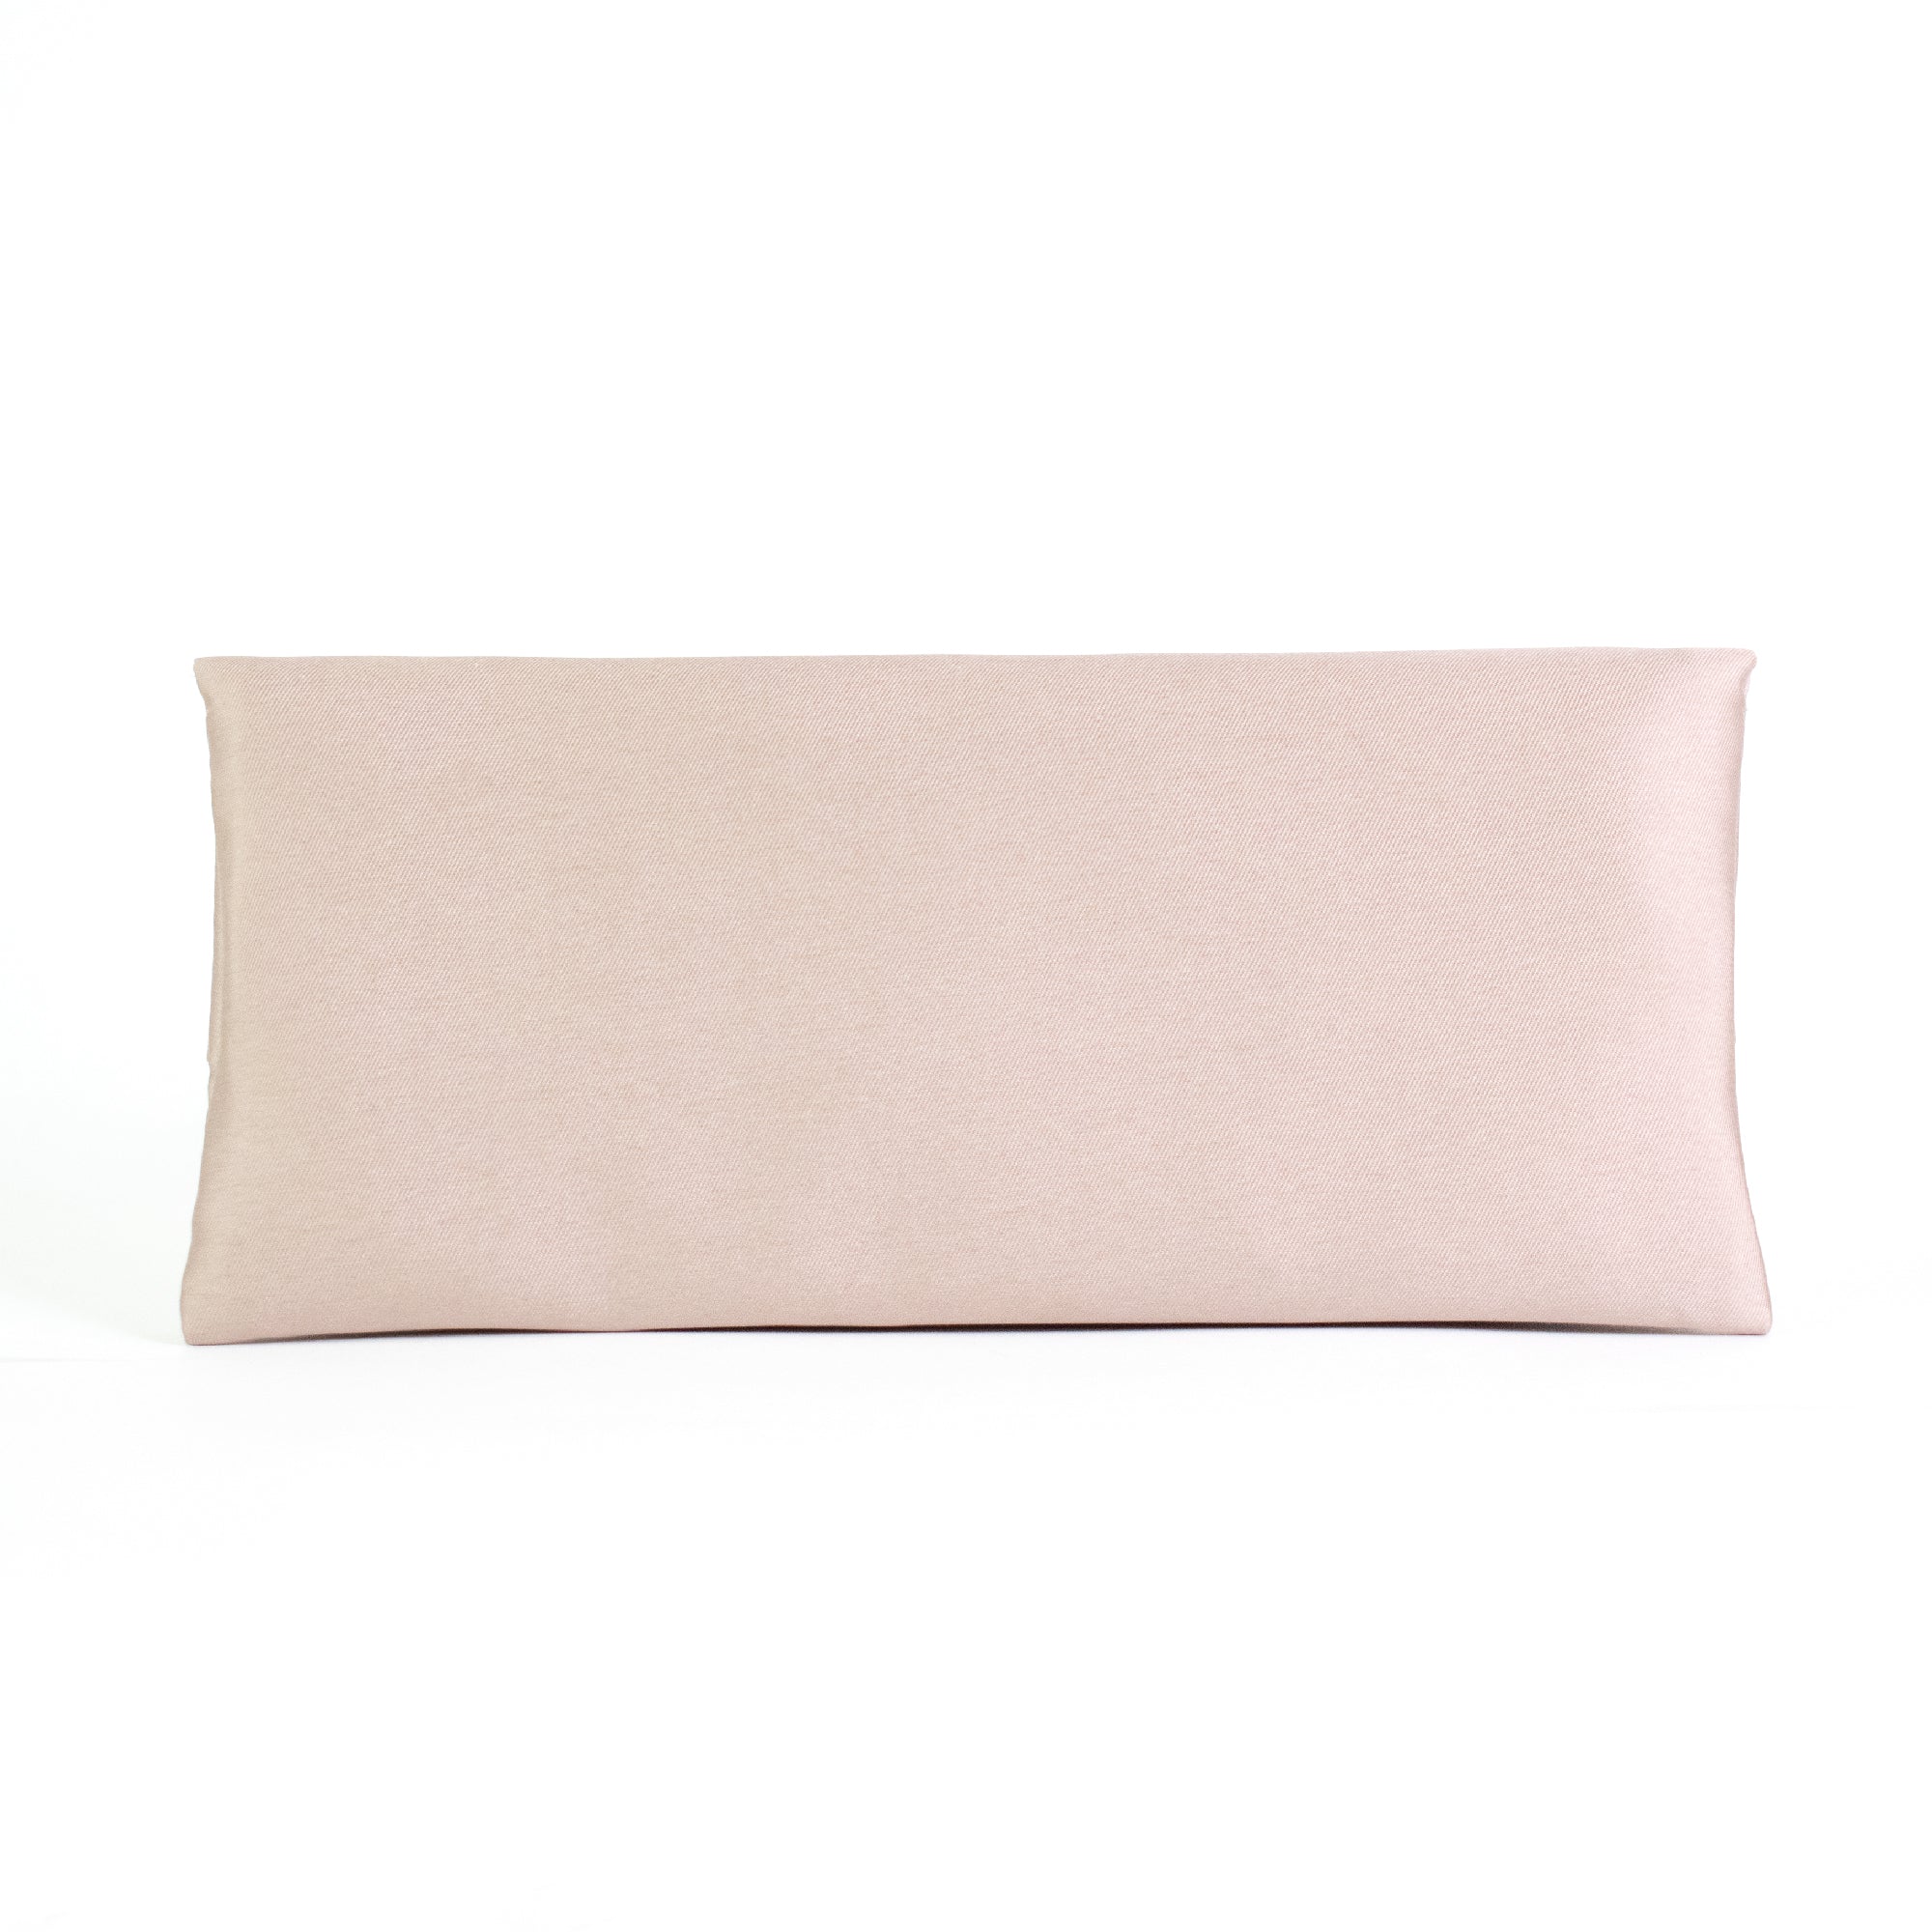 Powder pink clutch bag with two-tone flowers